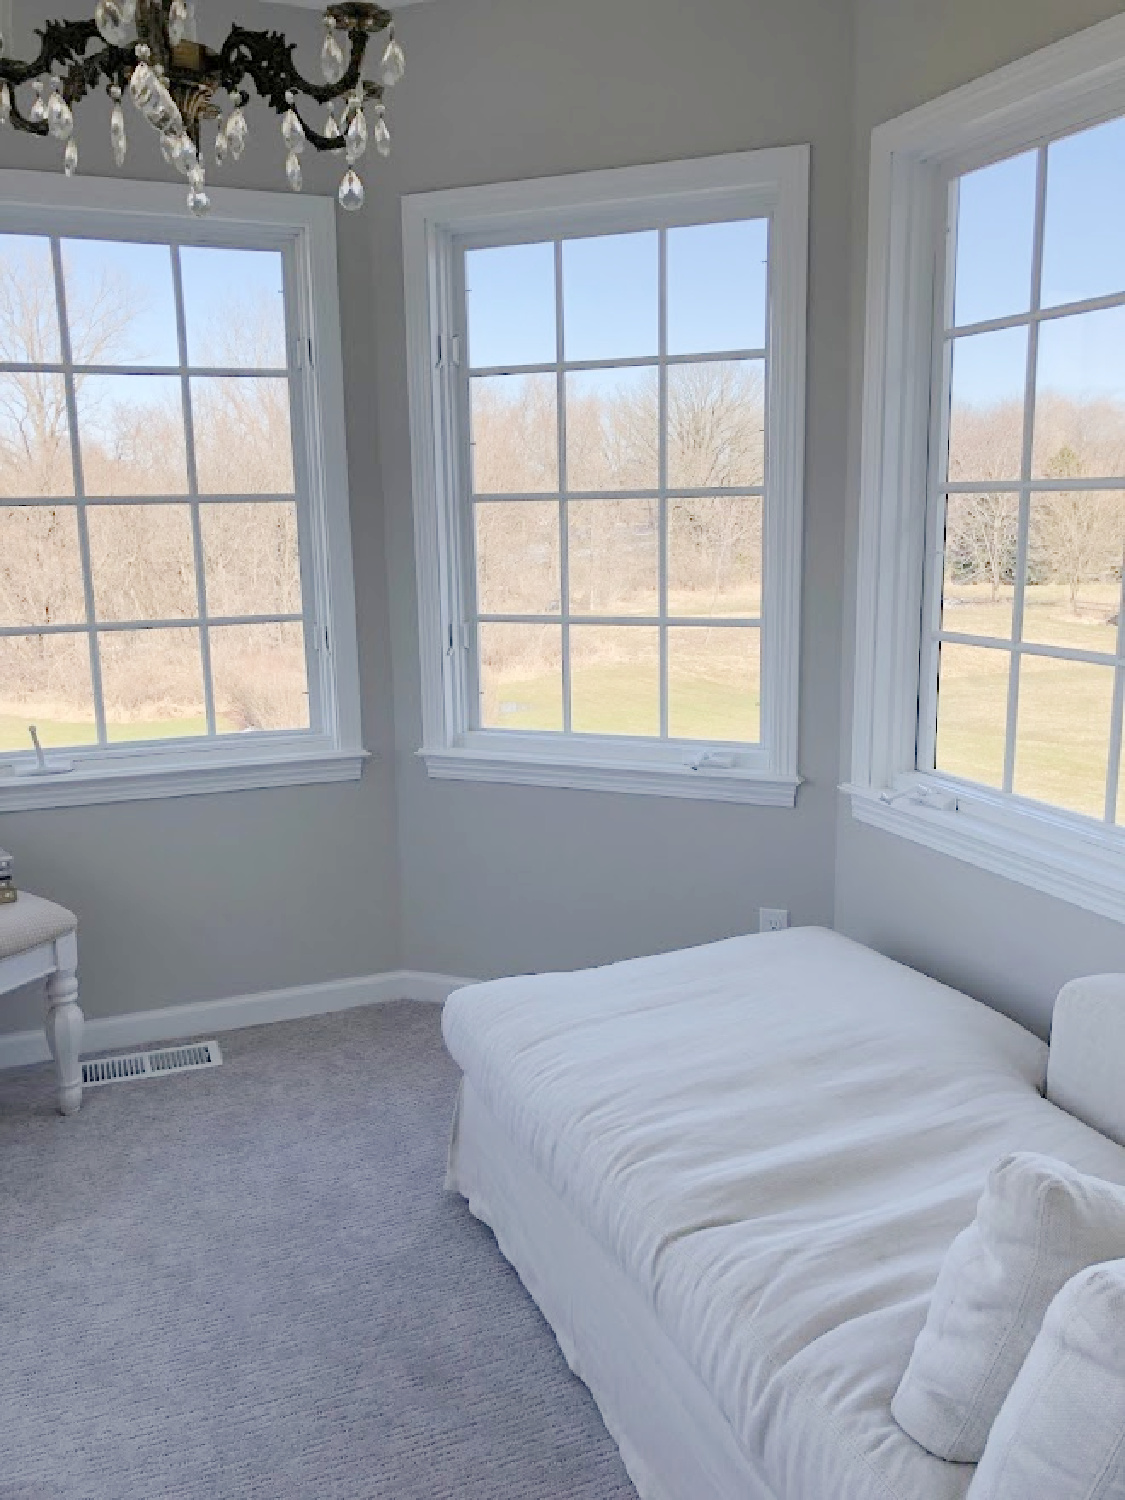 Belgian linen chaise in turret sitting room in coastal bedroom remodel (SW Agreeable Gray on walls) at the Georgian - Hello Lovely Studio. #agreeablegray #swagreeablegray